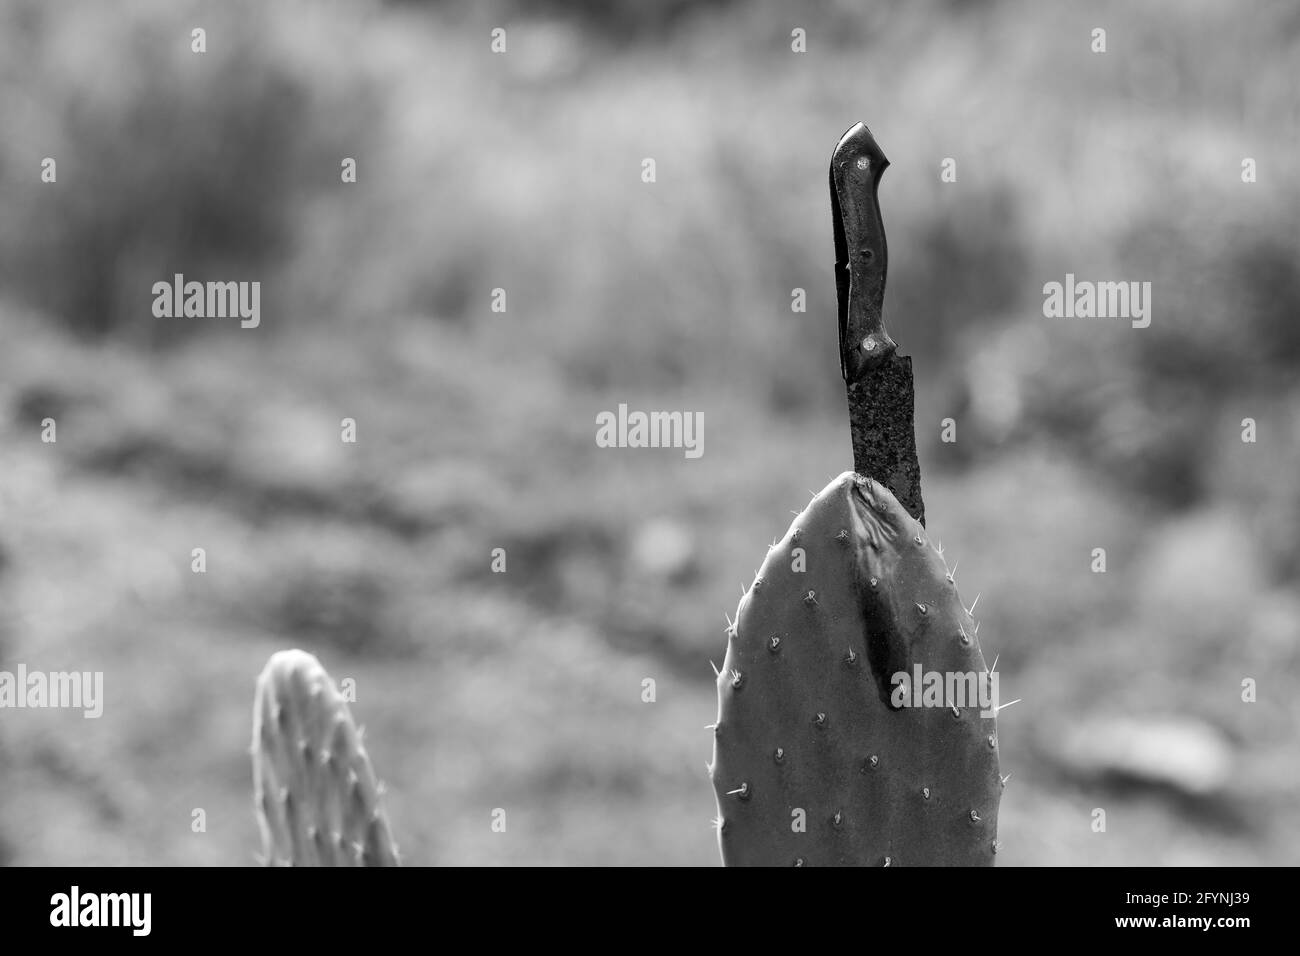 Knife in a cactus plant Stock Photo